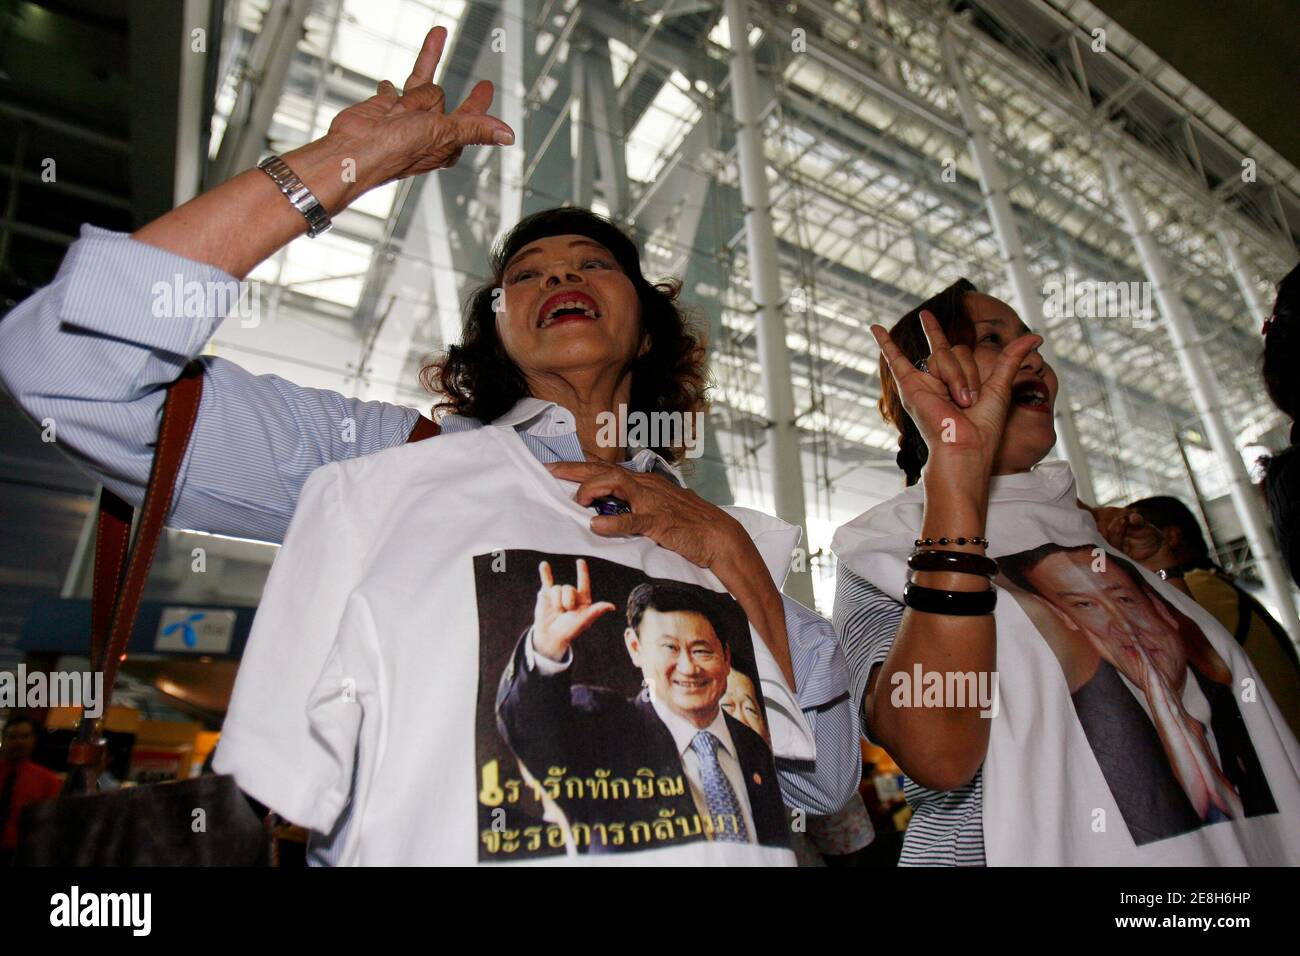 Supporters of former Prime Minister Thaksin Shinawatra hold T-shirts of Thaksin as they wait for Manchester City manager Sven Goran-Eriksson and midfielder Sun Jihai to arrive at Suvarnabhumi international airport in Bangkok November 15, 2007. Manchester City coach Sven-Goran Eriksson arrived in Bangkok on Thursday to raise the team's profile in Asia, but there were fewer club fans to greet him than security guards and supporters of owner Thaksin Shinawatra. REUTERS/Chaiwat Subprasom (THAILAND) Stock Photo